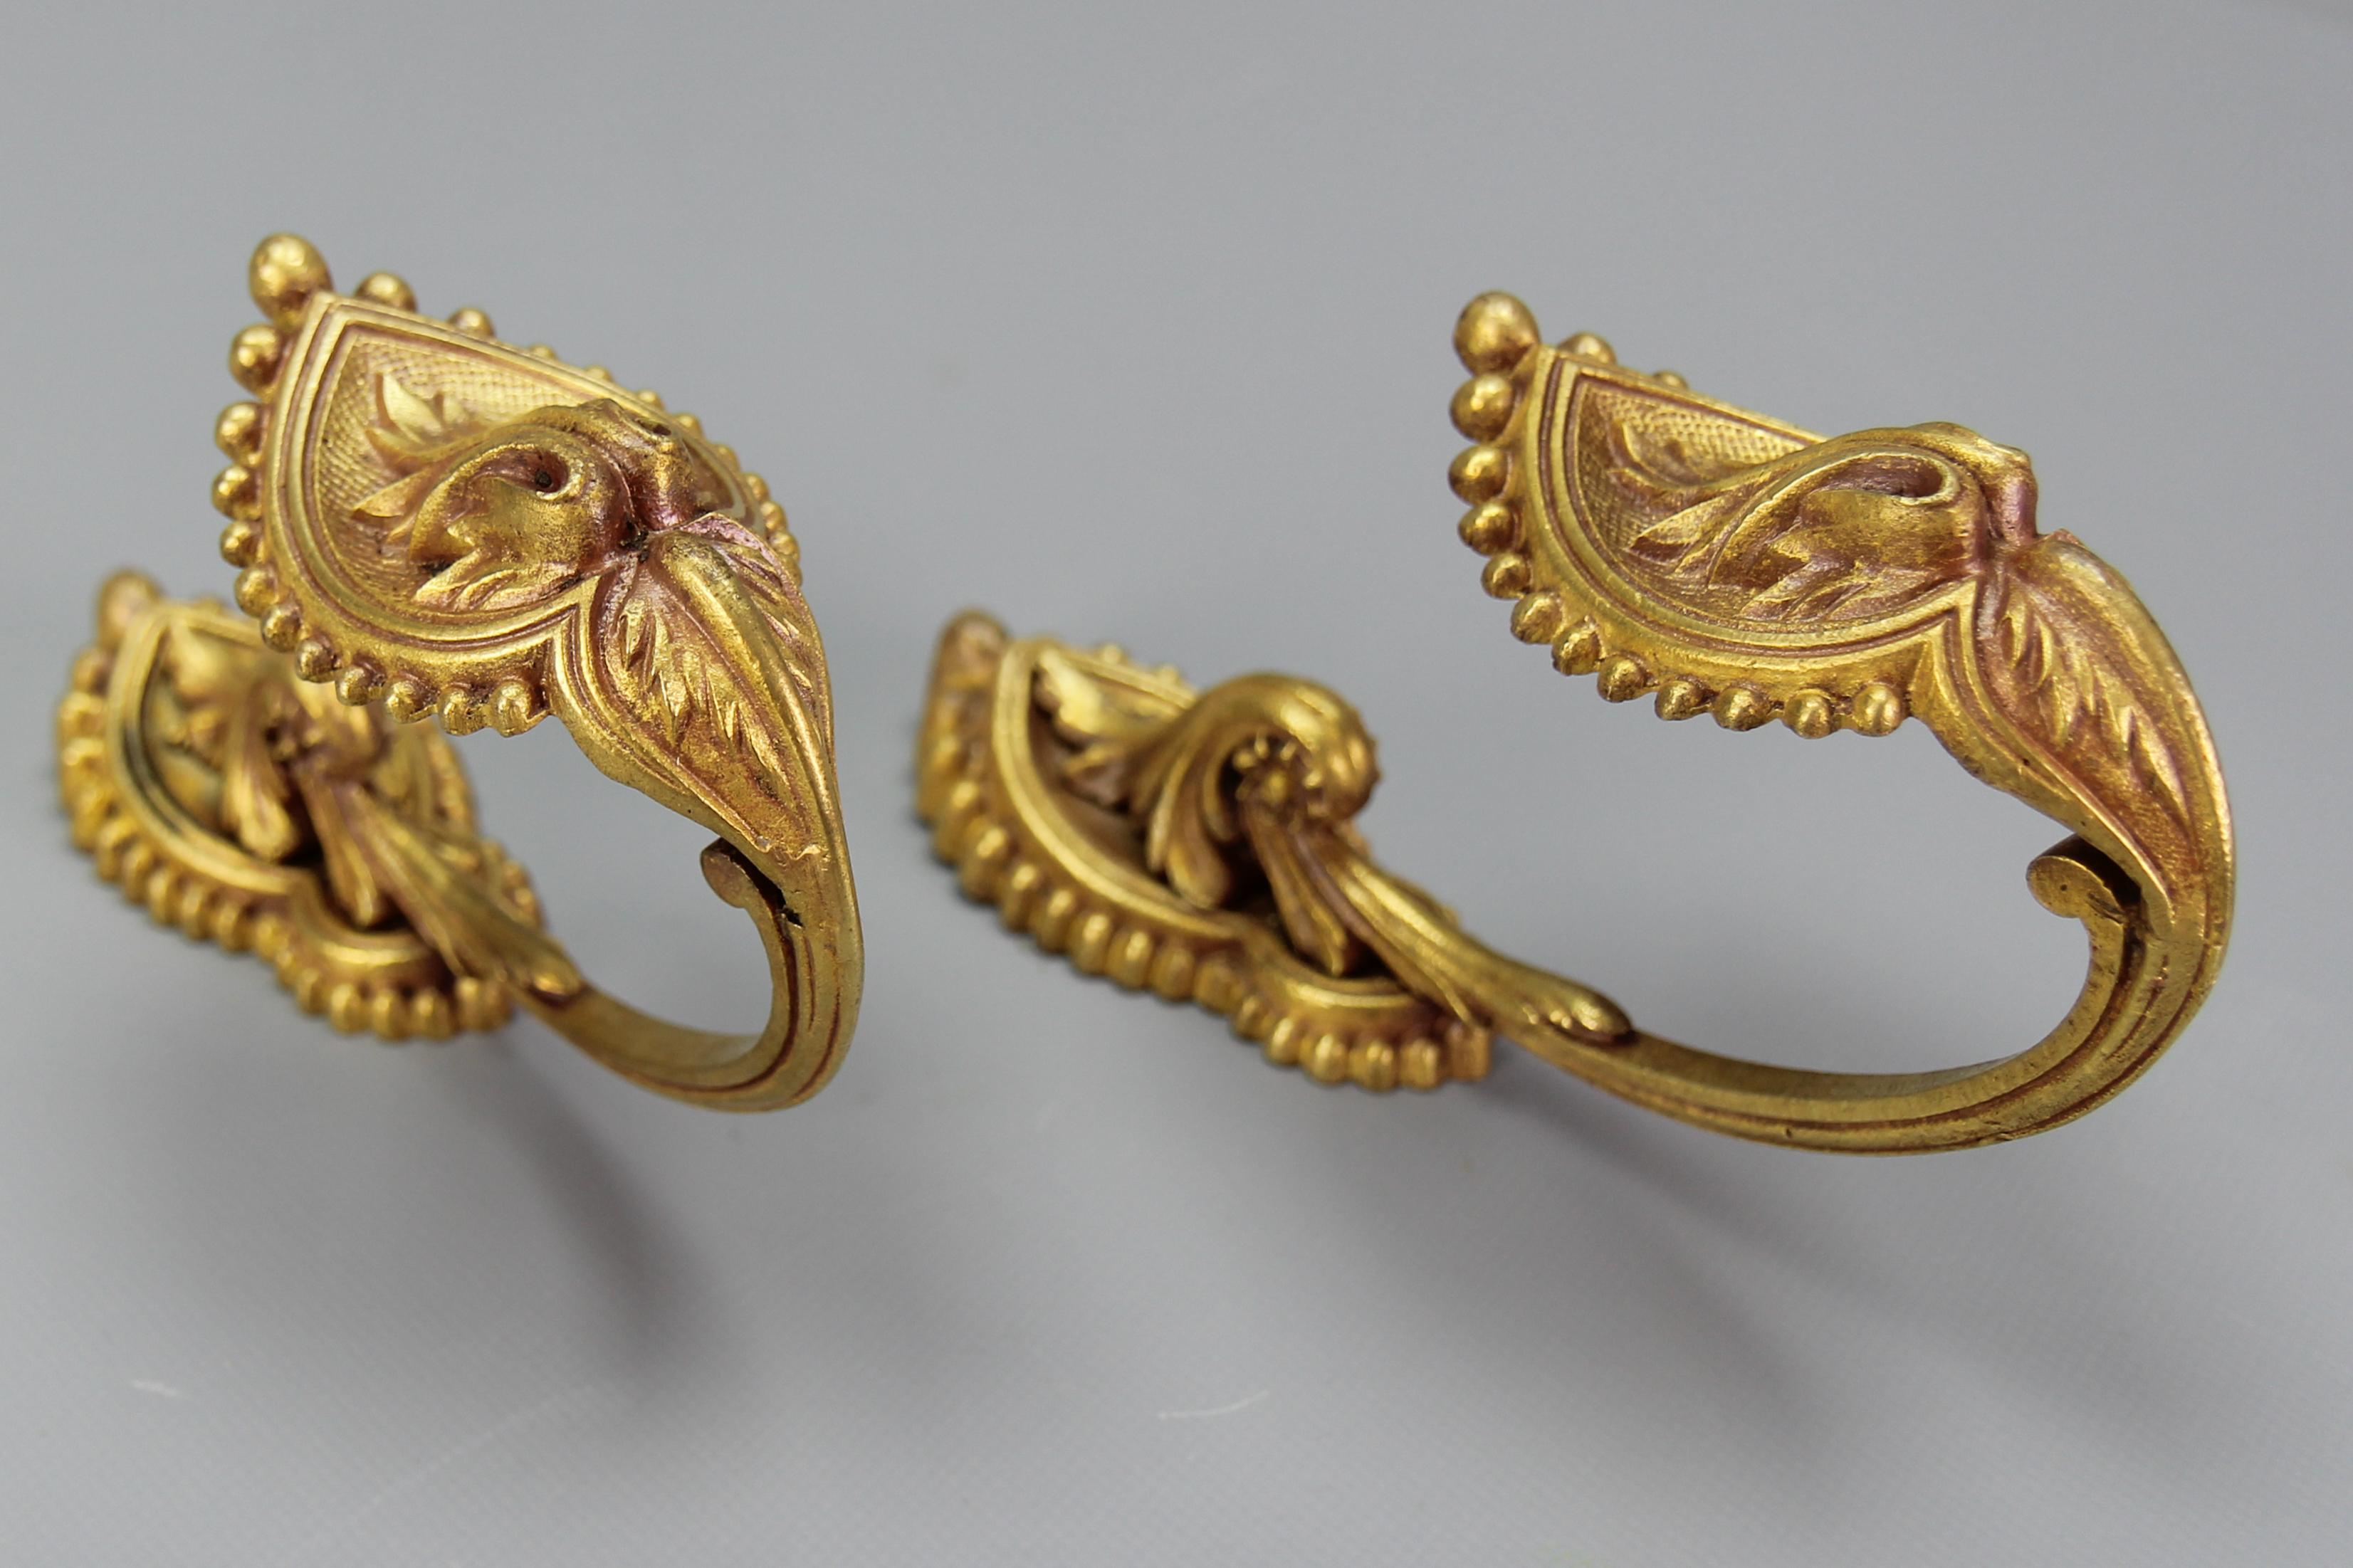 A pair of French neoclassical style bronze curtain tiebacks or curtain holders, from the early 1900s.
A beautiful pair of neoclassical or Louis XVI style bronze curtain holders or supports, or tie-backs. This pair of curtain supports is very